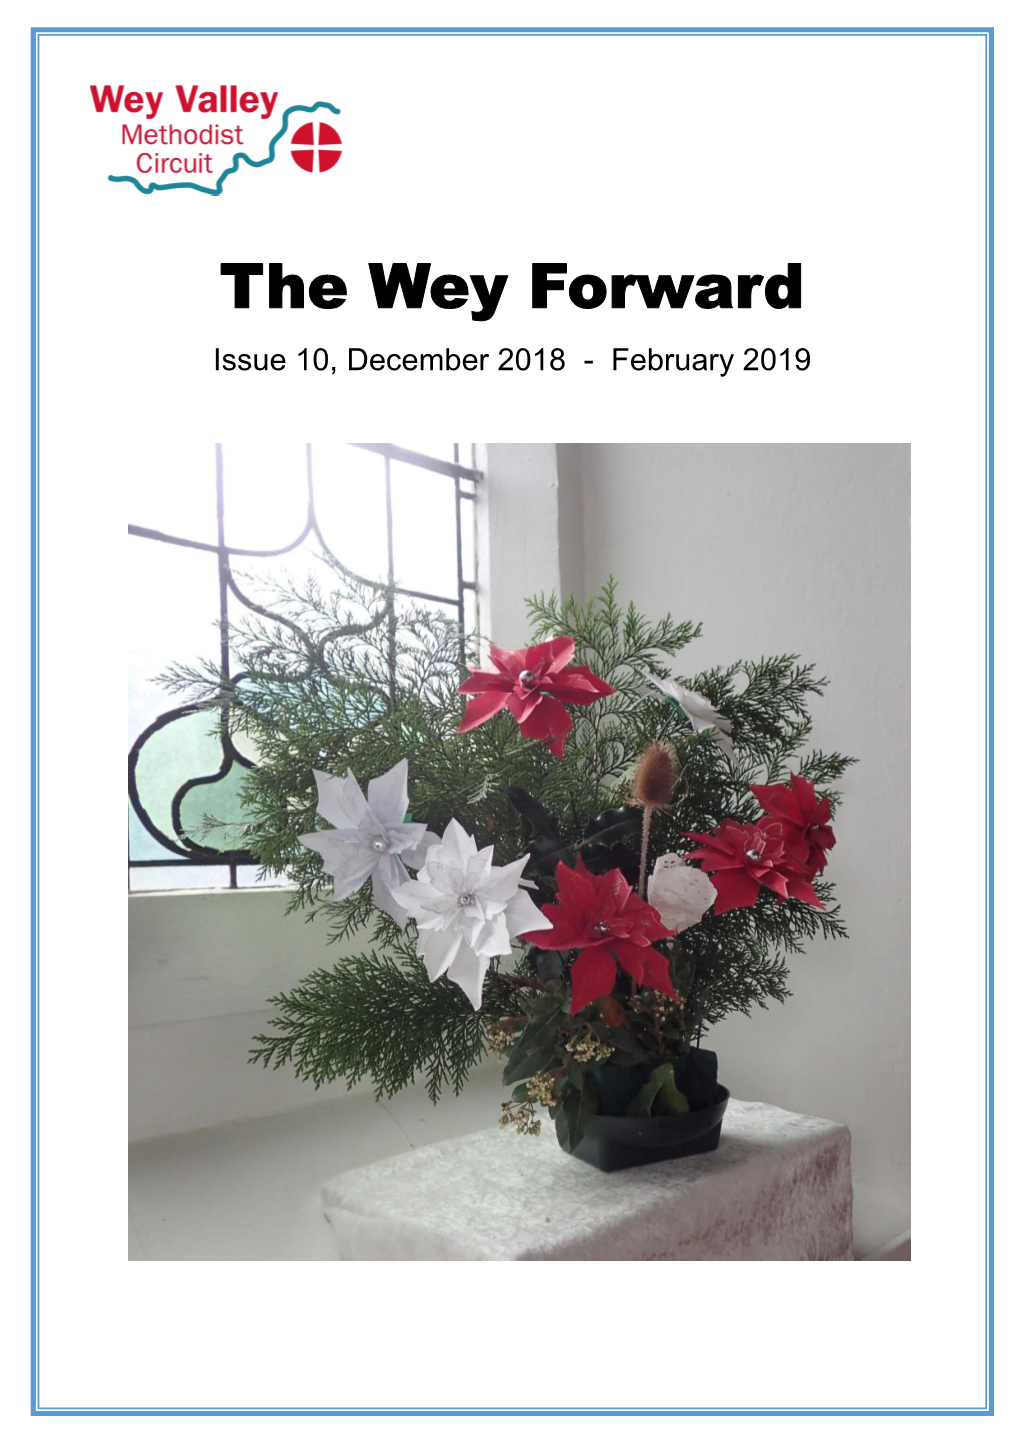 The Wey Forward Issue 10, December 2018 - February 2019